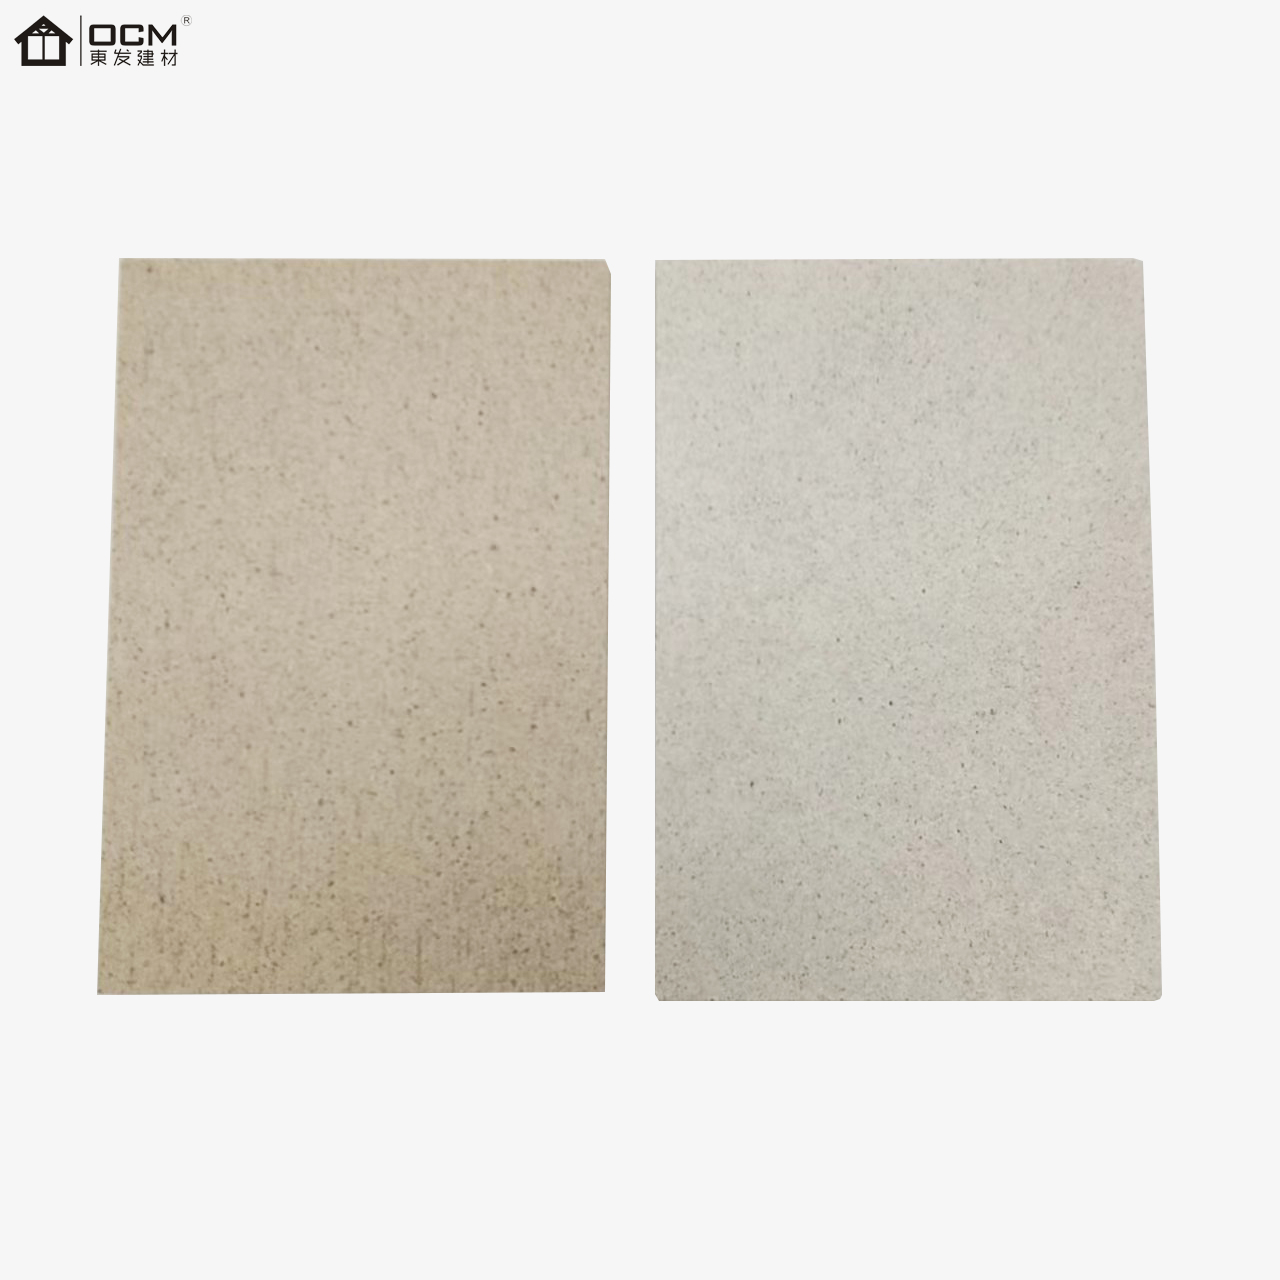 Eco Friendly Fireproof Sanded Magnesium Oxide Board